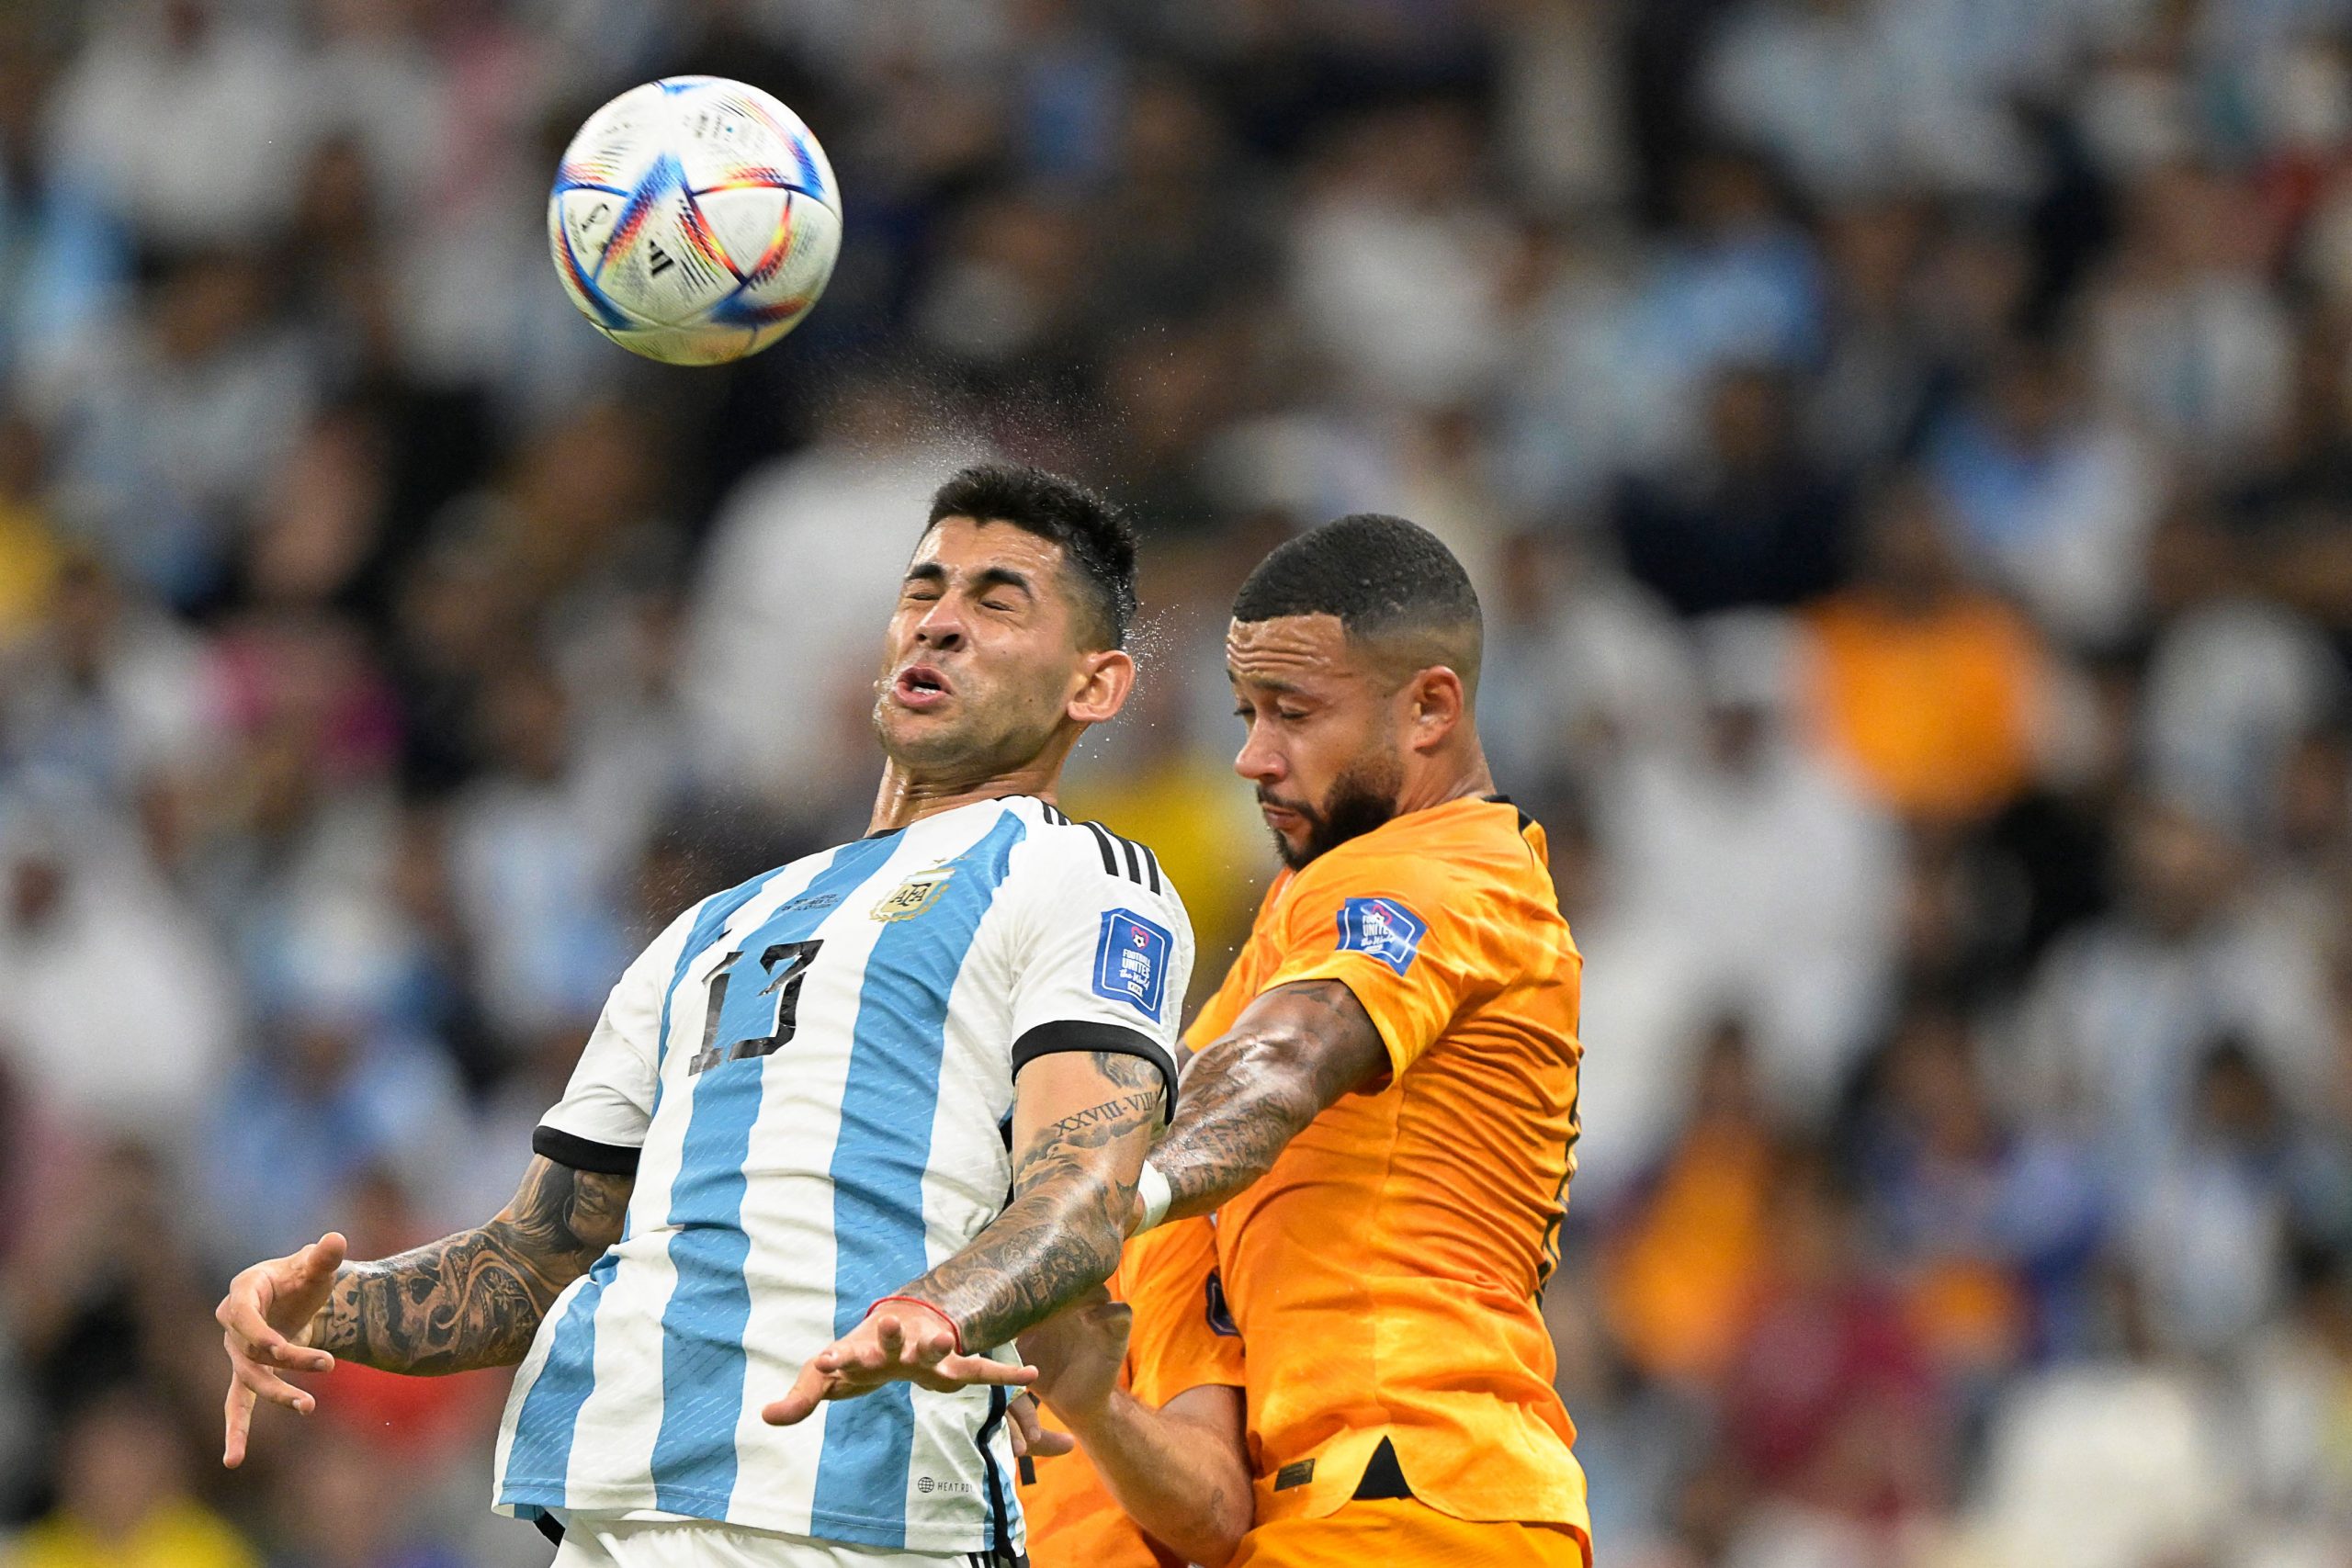 Argentina's defender #13 Cristian Romero fights for the ball with Netherlands' forward #10 Memphis Depay during the Qatar 2022 World Cup quarter-final football match between The Netherlands and Argentina at Lusail Stadium, north of Doha on December 9, 2022. (Photo by JUAN MABROMATA / AFP) (Photo by JUAN MABROMATA/AFP via Getty Images)